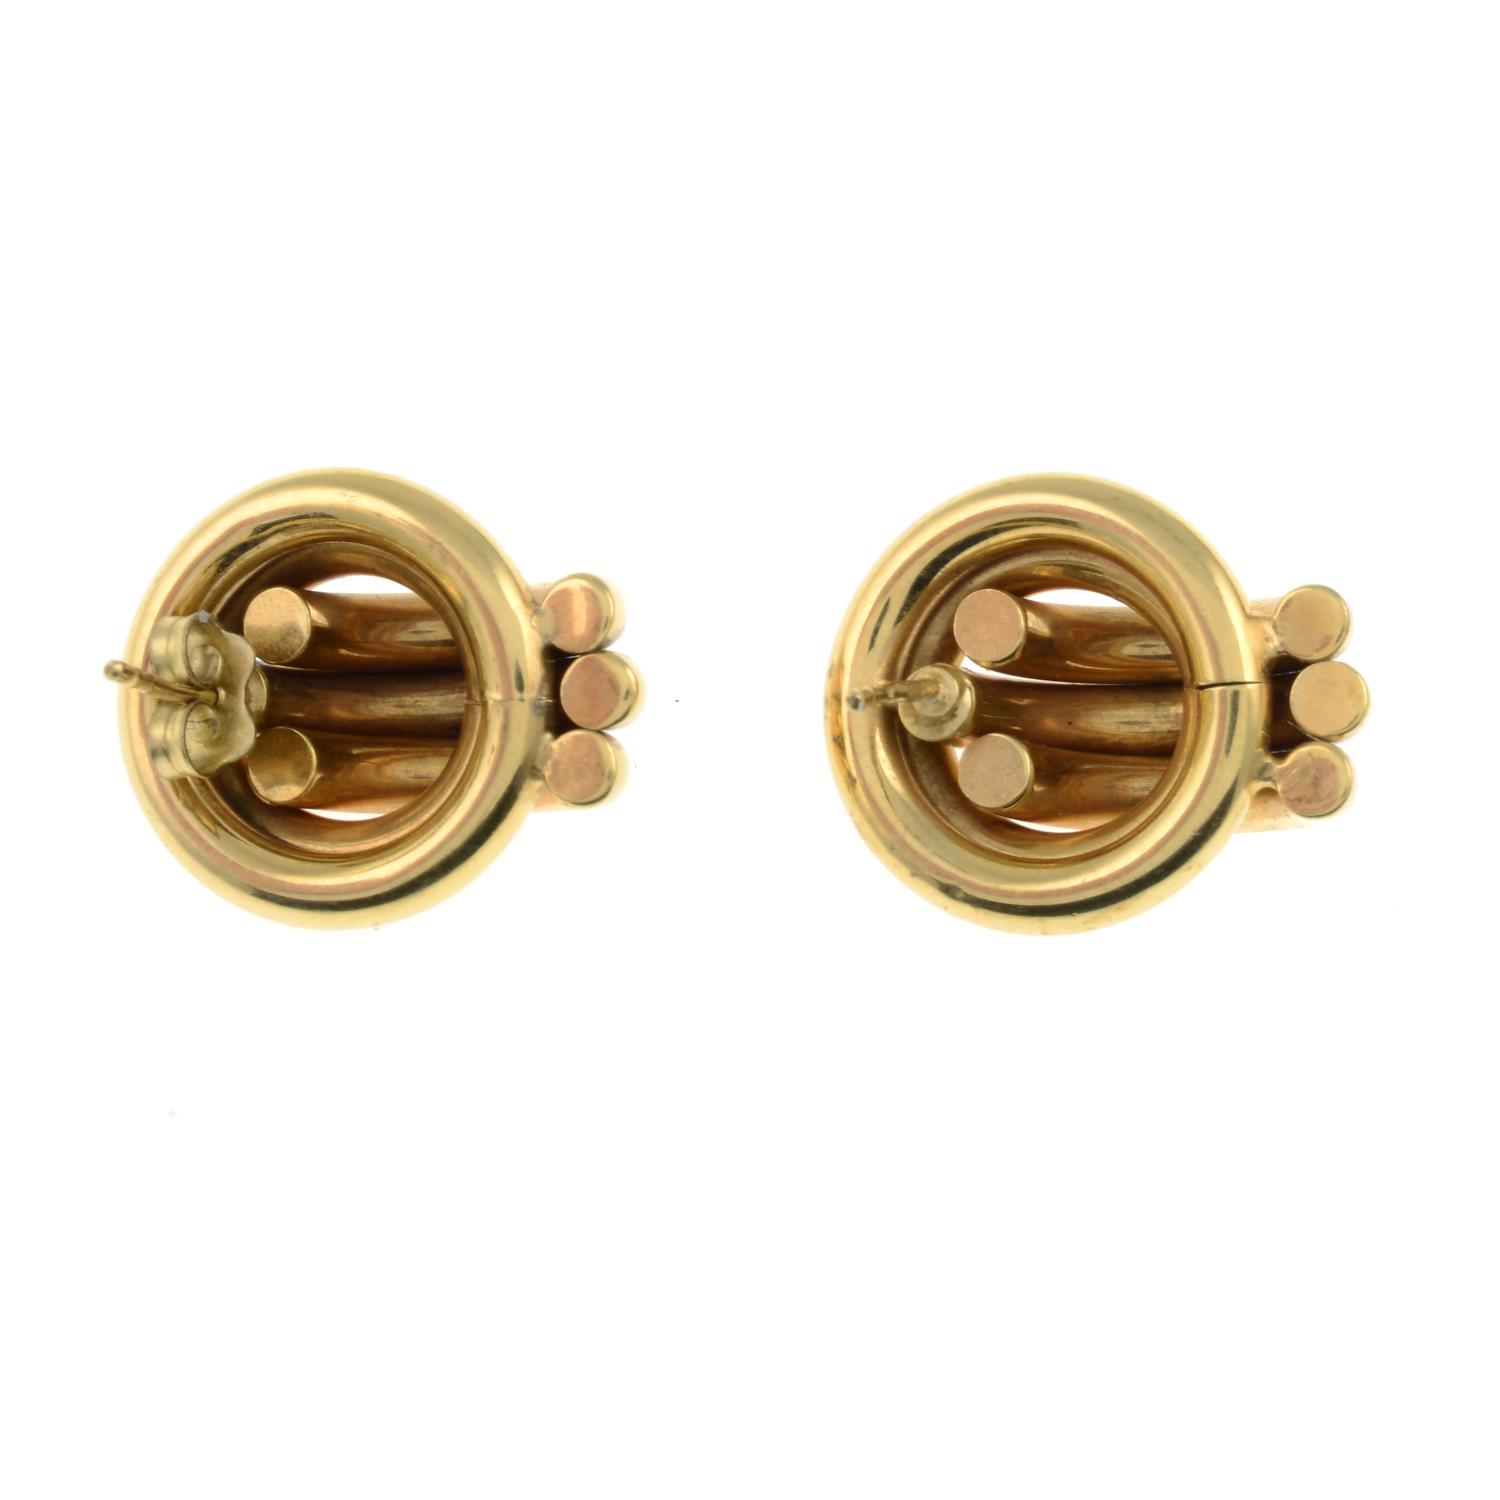 A pair of 9ct gold earrings.Hallmarks for 9ct gold. - Image 2 of 2